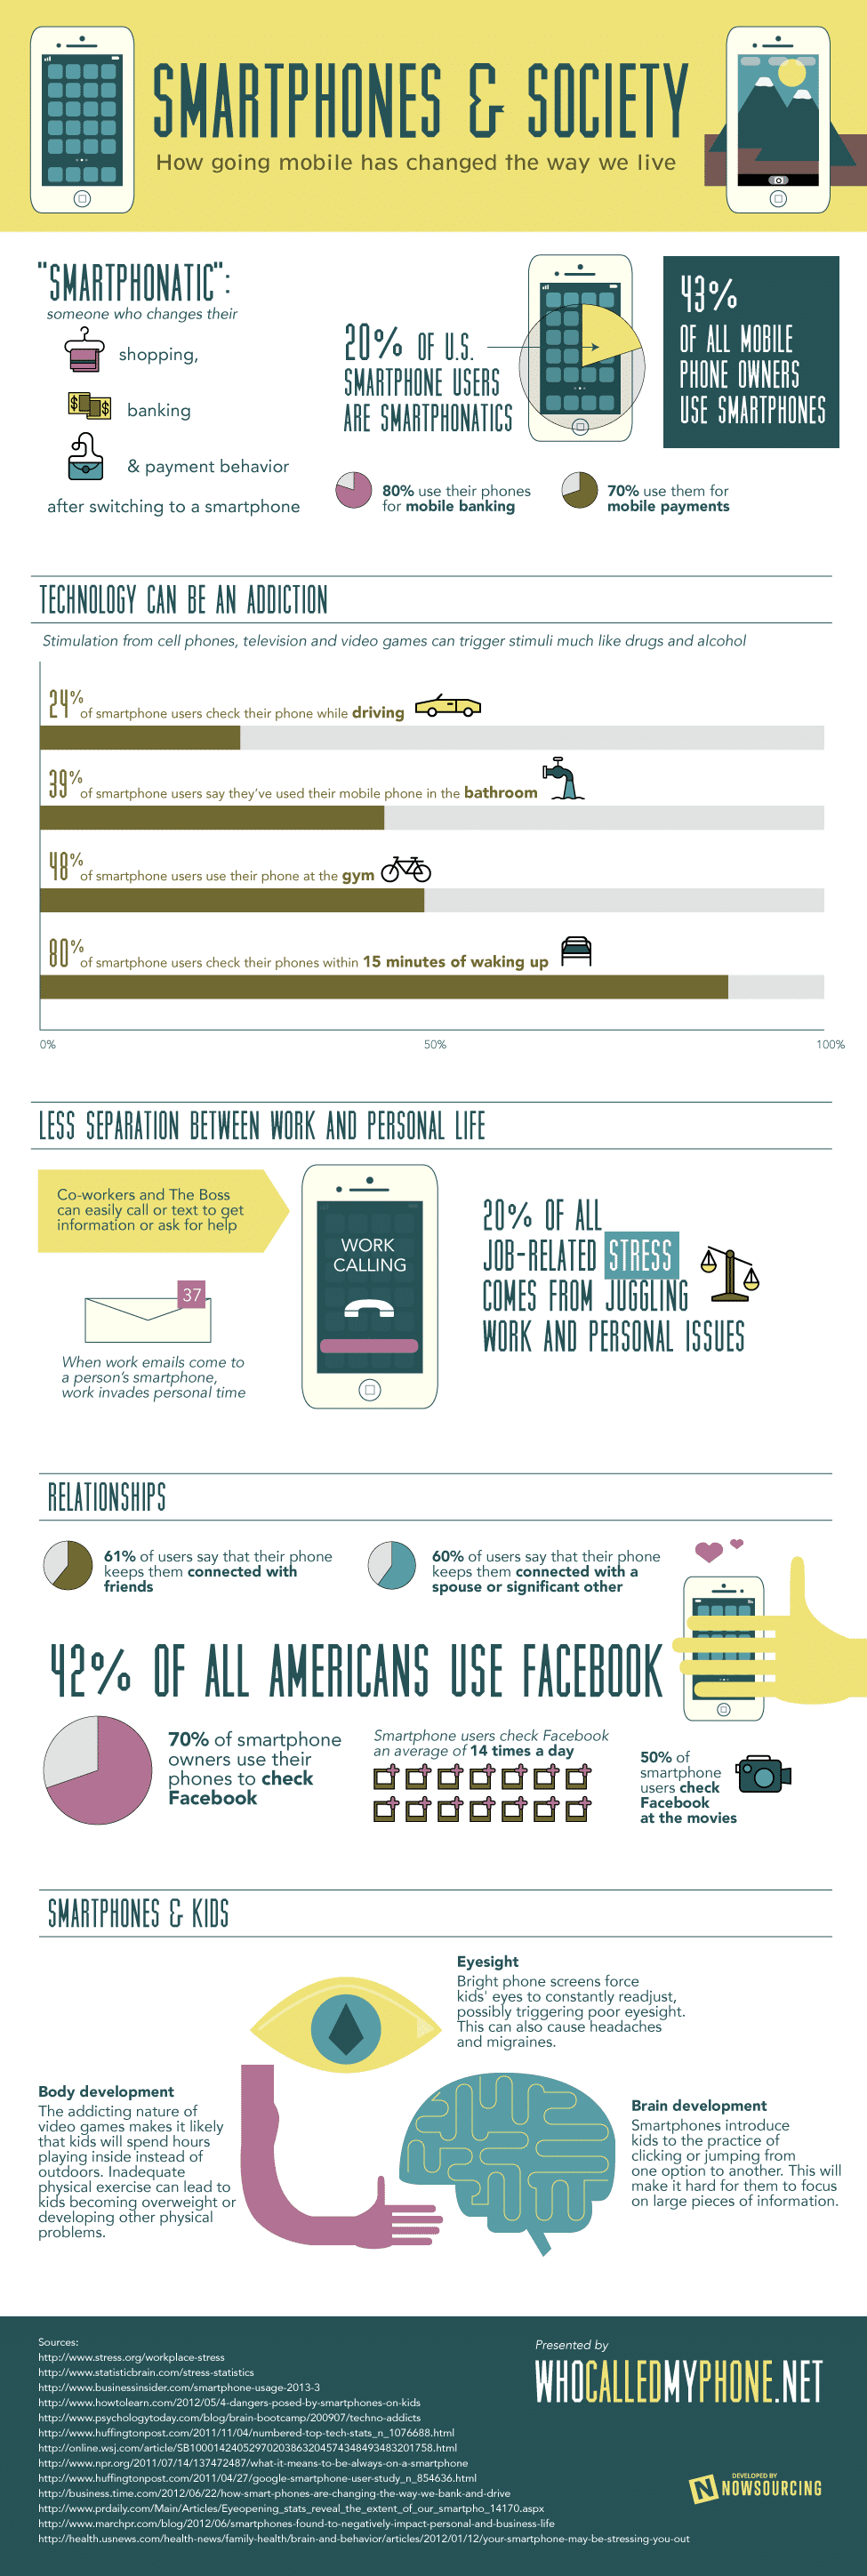 society-effects-of-smartphones-infographic